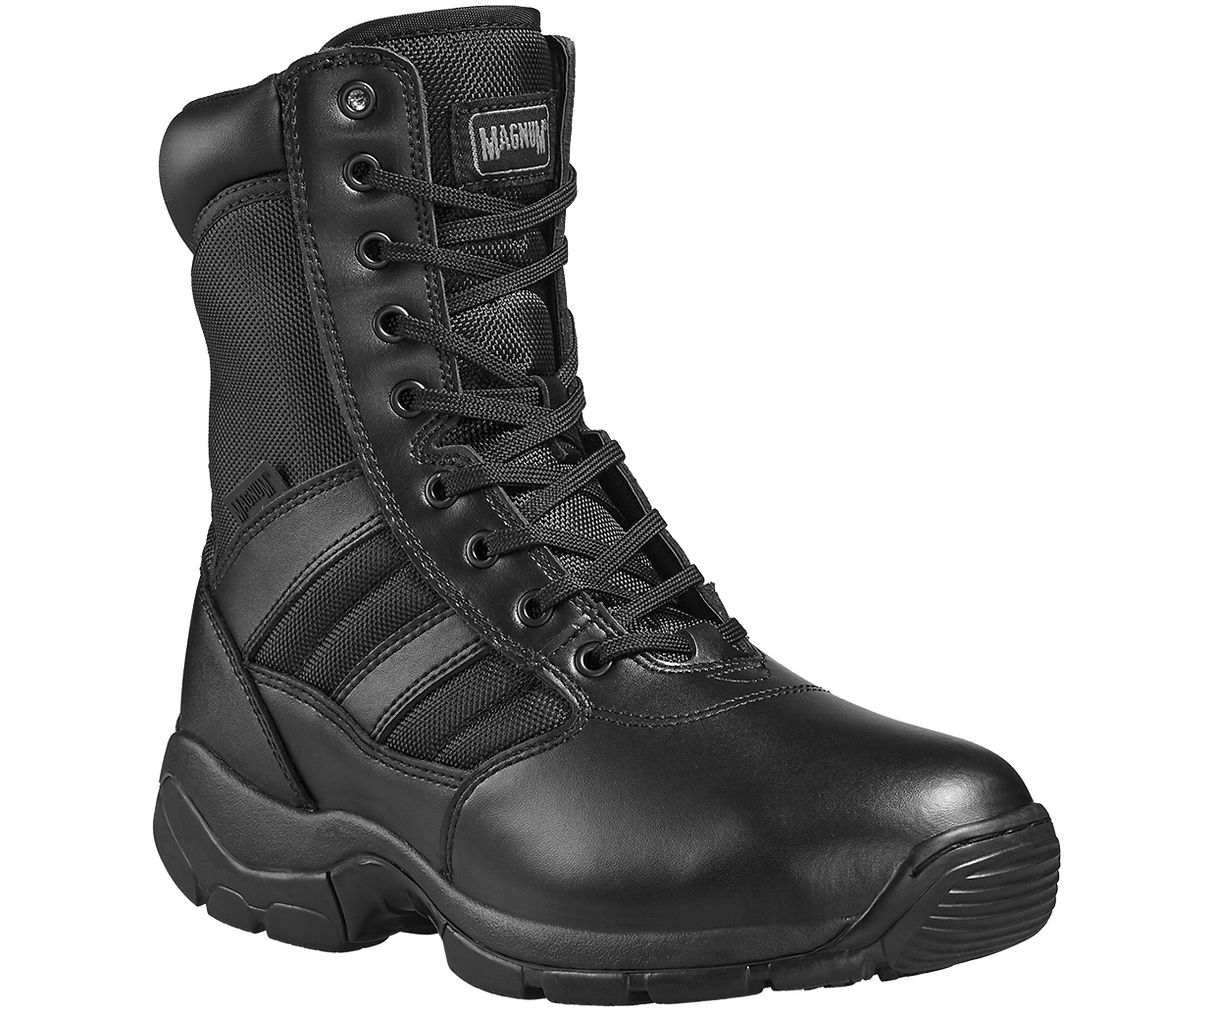 Magnum Panther 8.0 Side Zip Boots